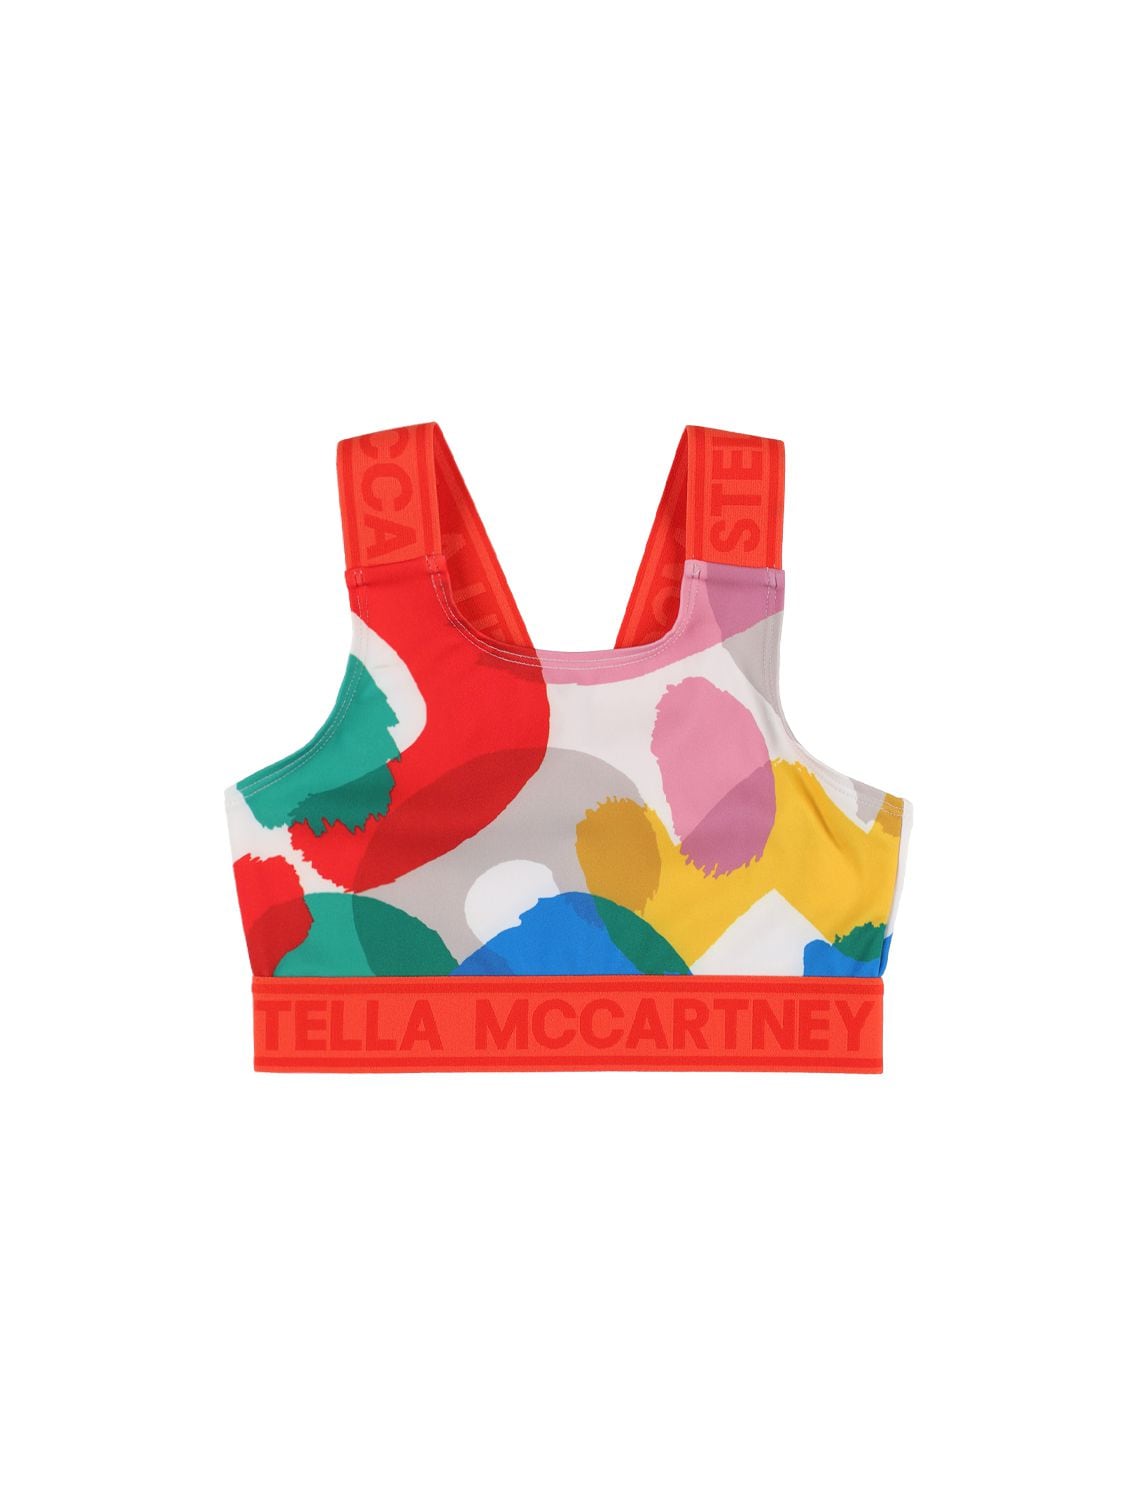 Stella Mccartney Kids' Recycled Nylon Tech Printed Top In Multicolor